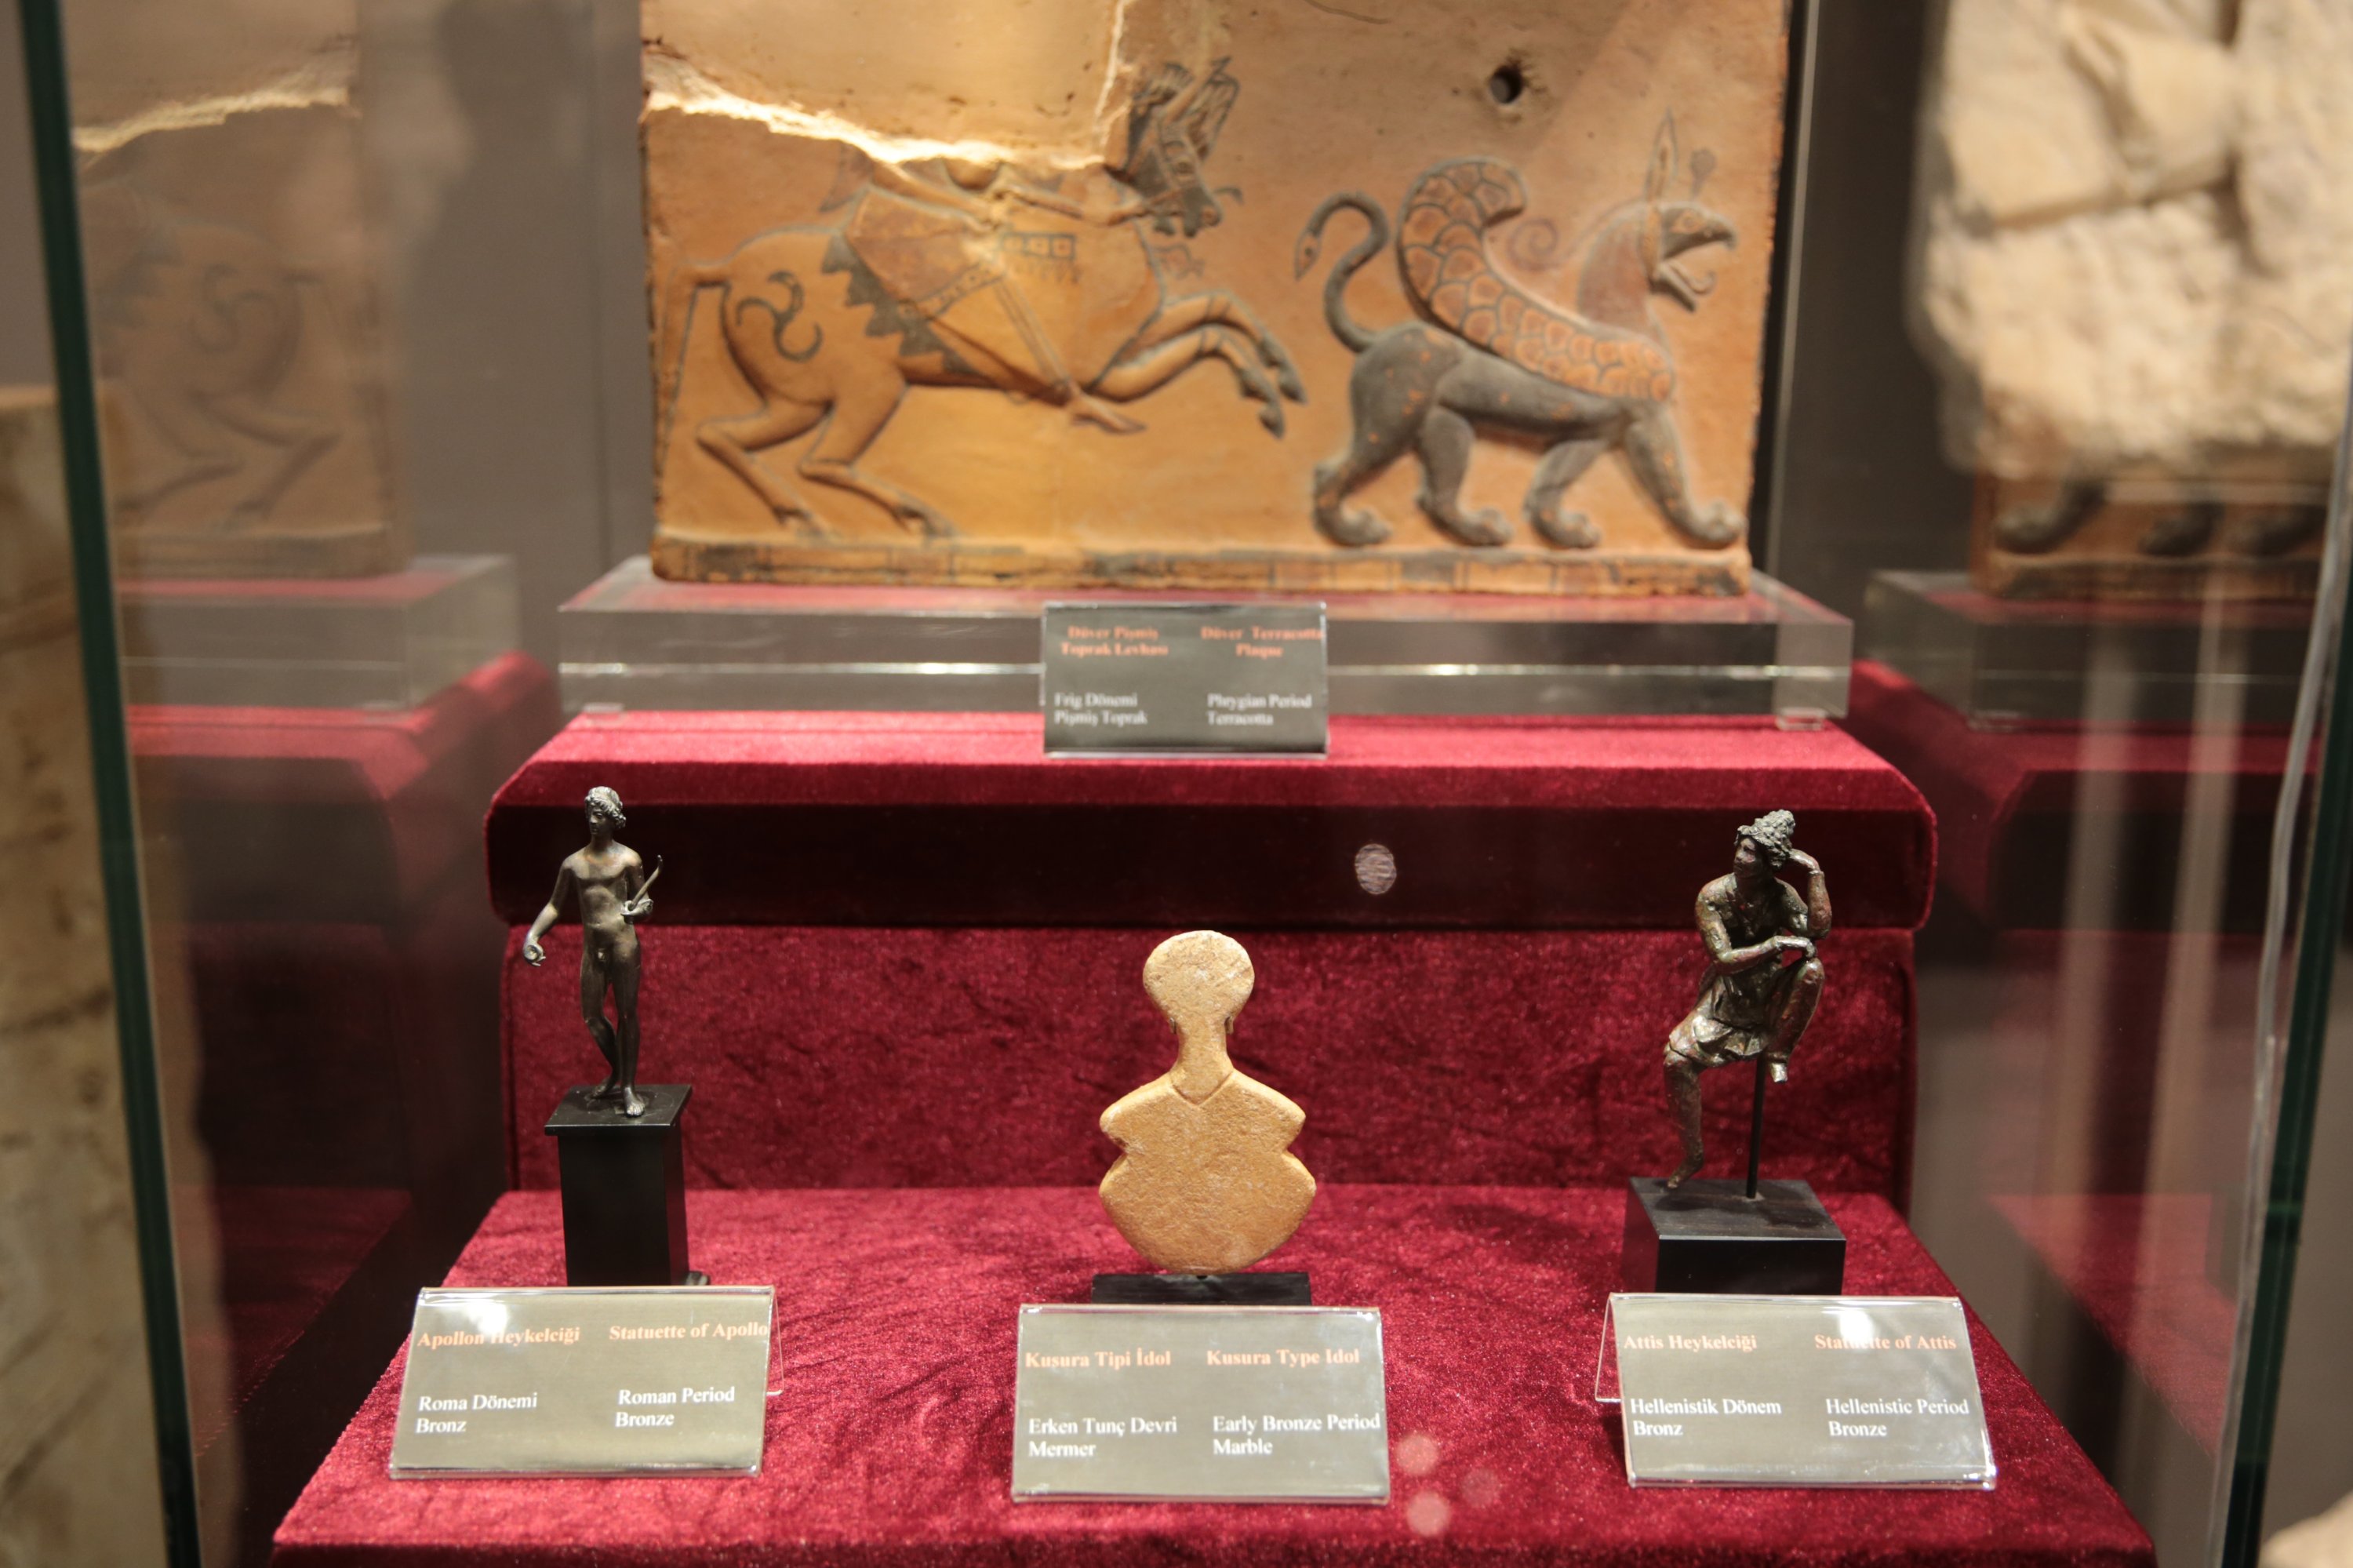 Attis and Apollo figurines, a Kusura-type idol and a terracotta plate smuggled to the U.S. years ago and returned to their homeland are on display in Antalya, Türkiye, Nov. 13, 2022. (AA Photo)